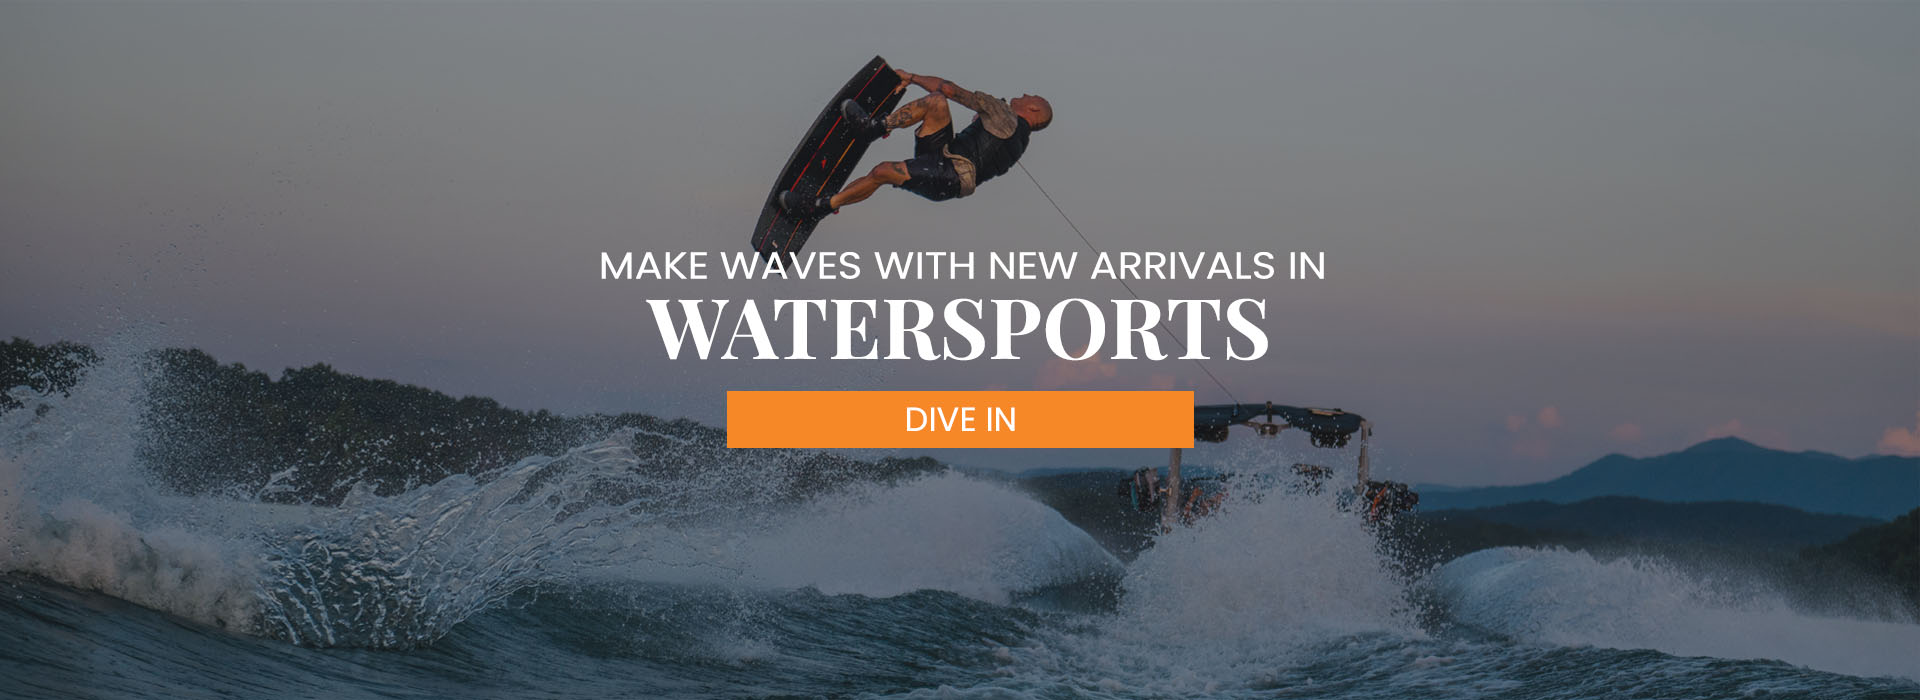 Make A Wave With New Arrivals In Watersports. Shop Now!